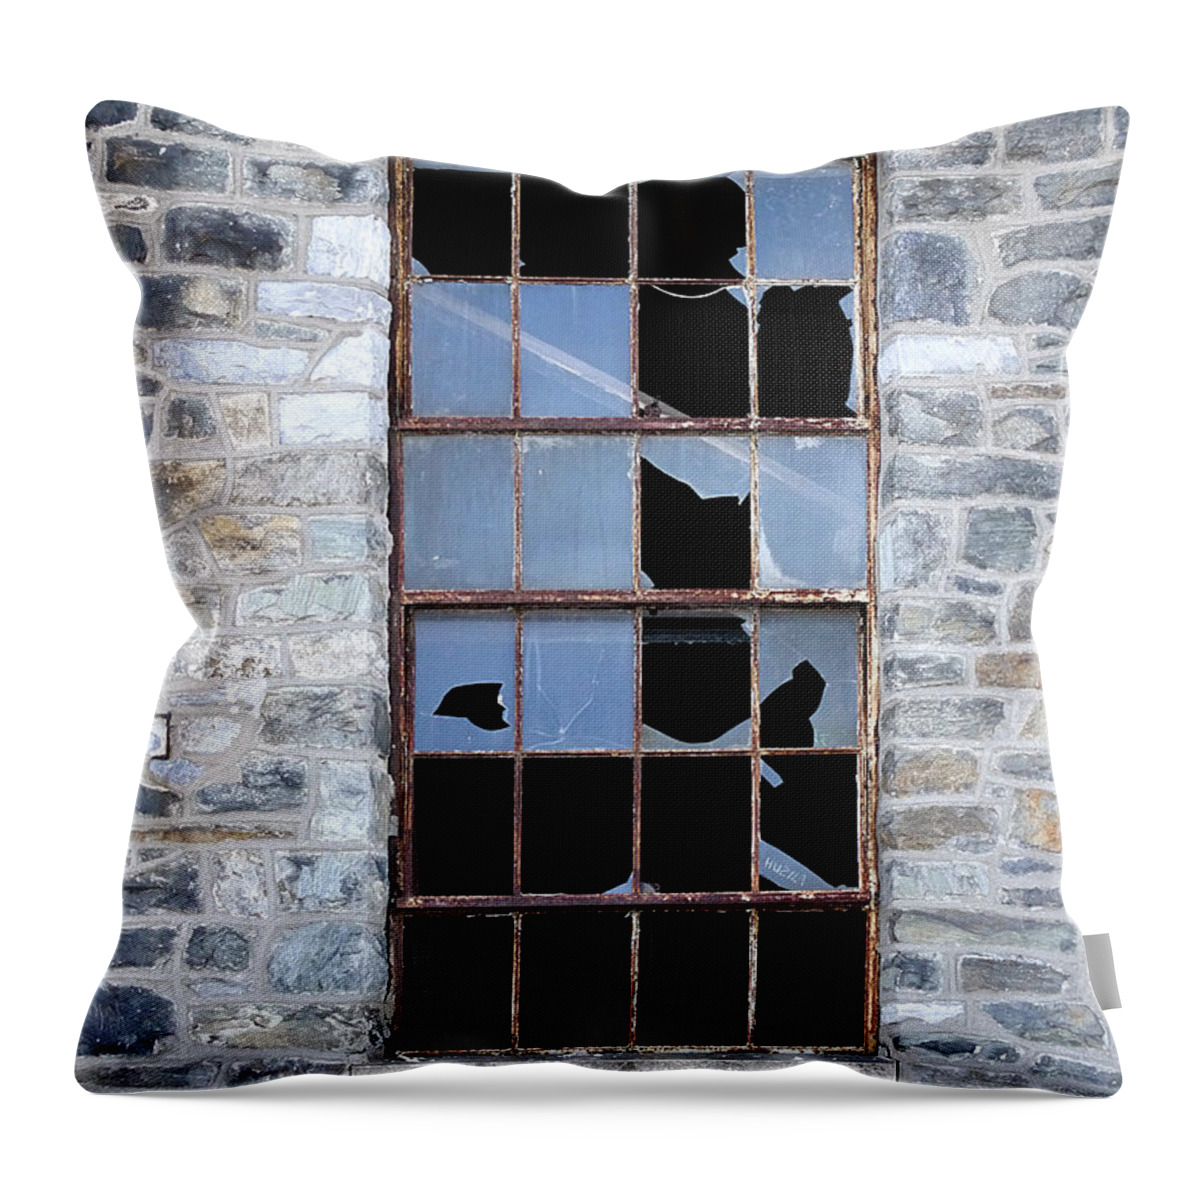 Richard Reeve Throw Pillow featuring the photograph 24-7 Window by Richard Reeve